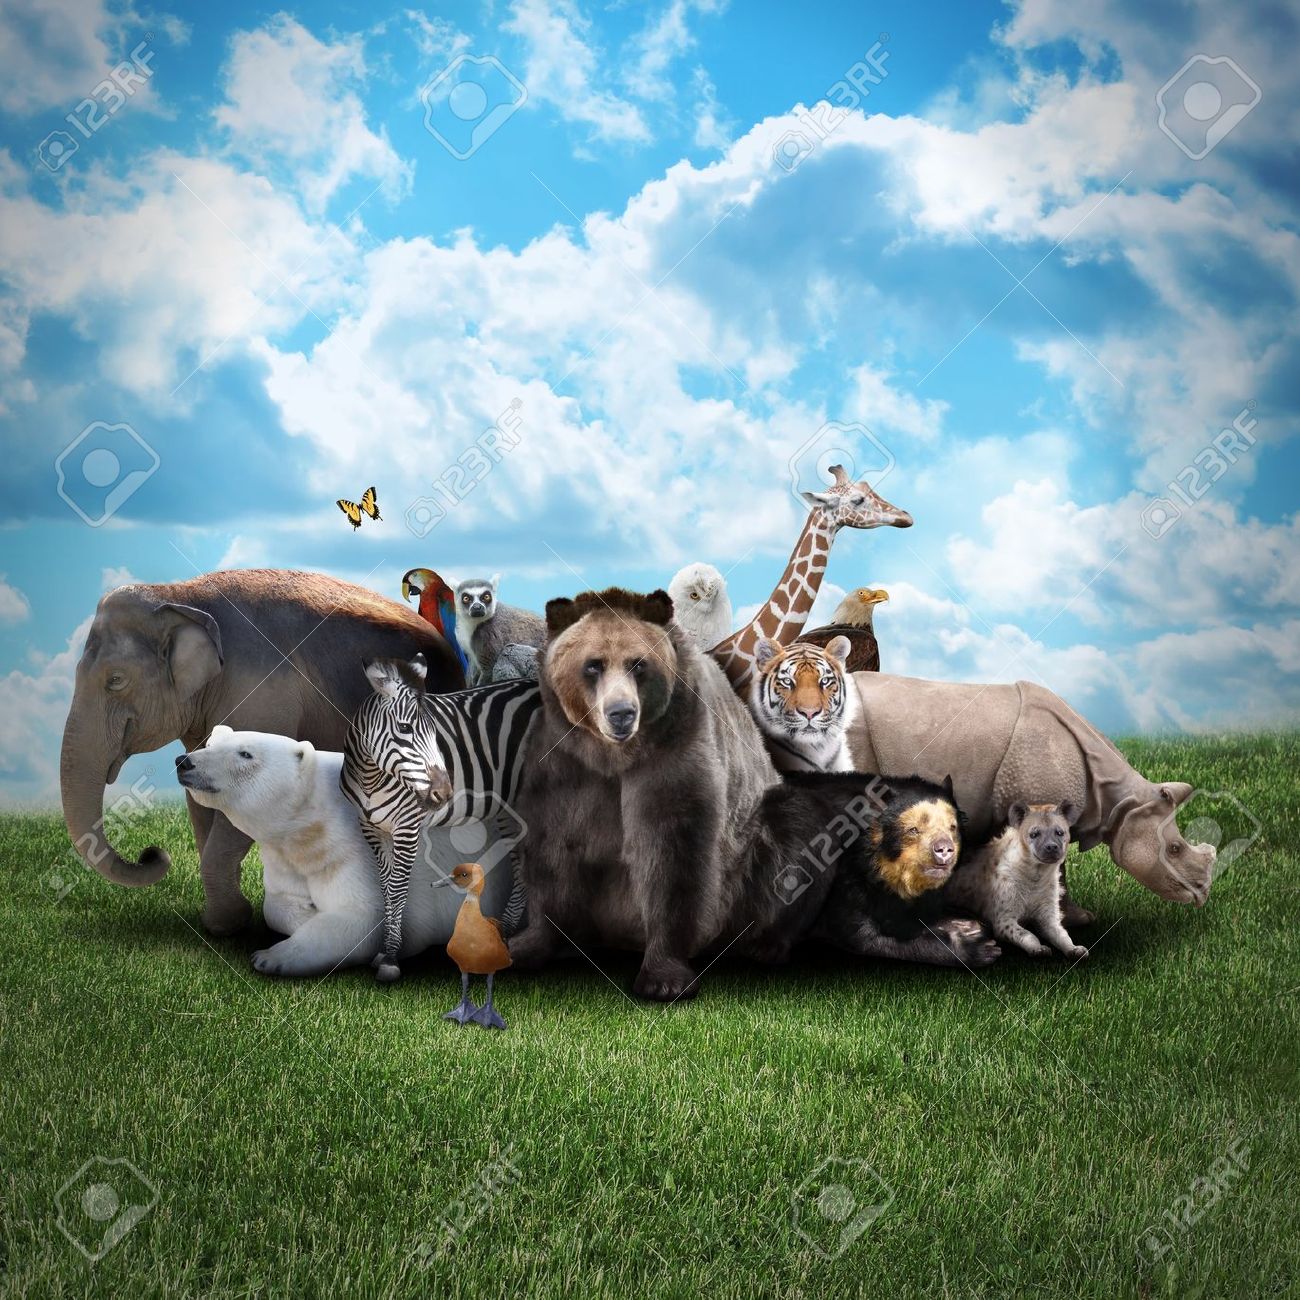 a-group-of-animals-are-together-on-a-nature-background-with-text-area-animals-range-from-an-elephant.jpg